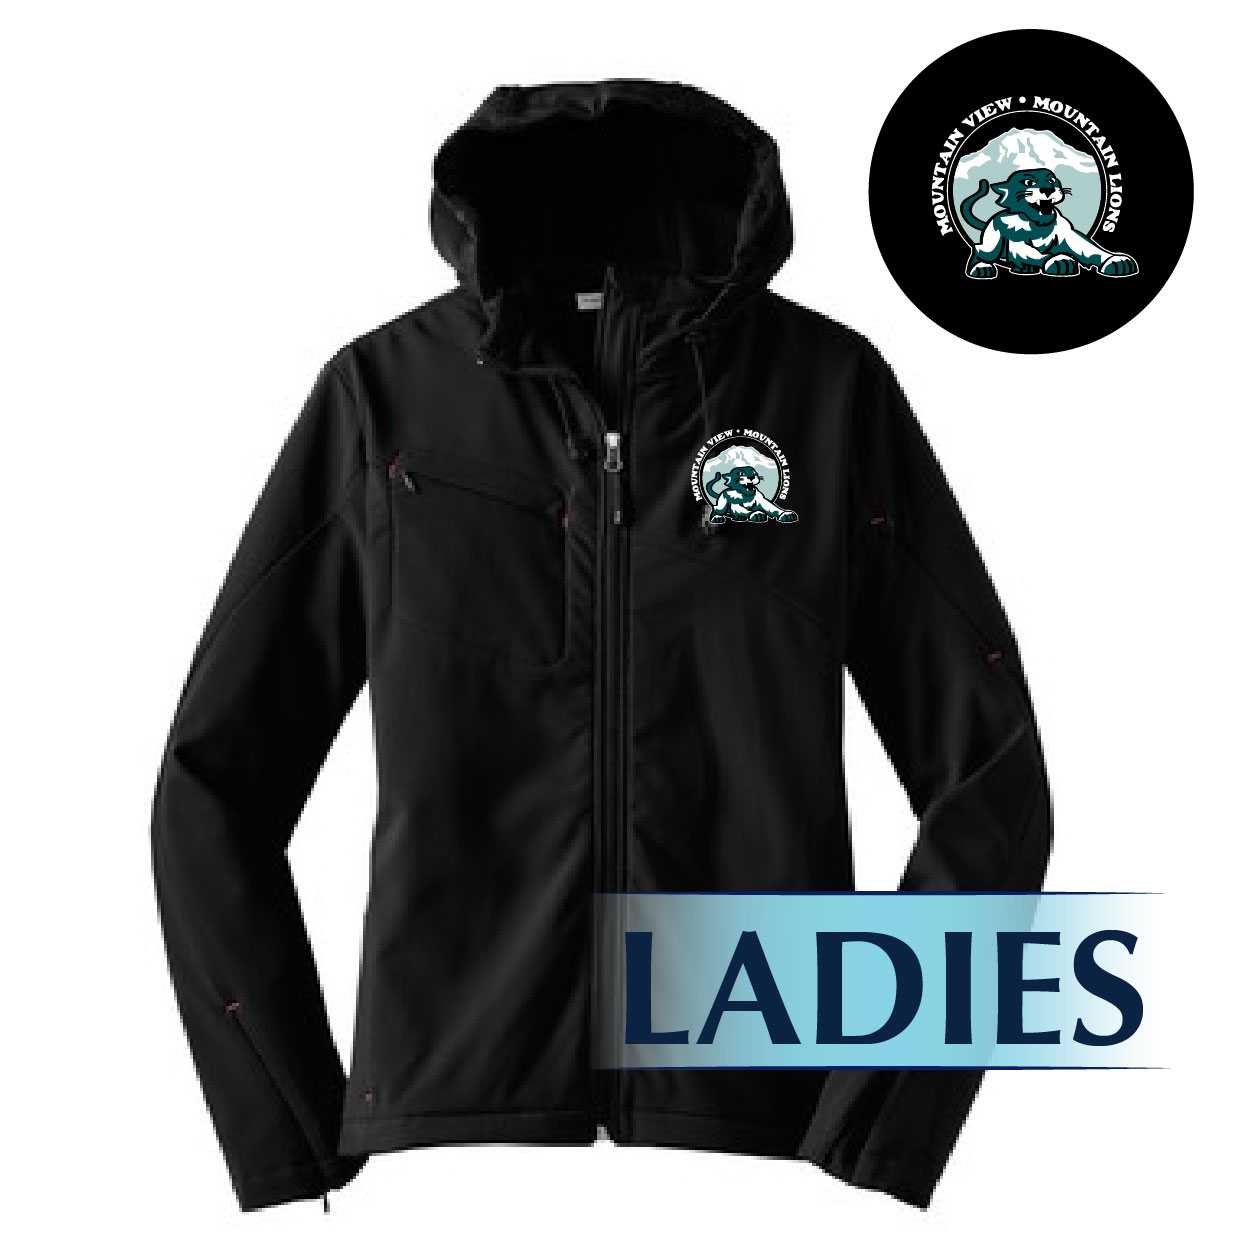 1-L706 Ladies Textured Hooded Soft Shell Jacket